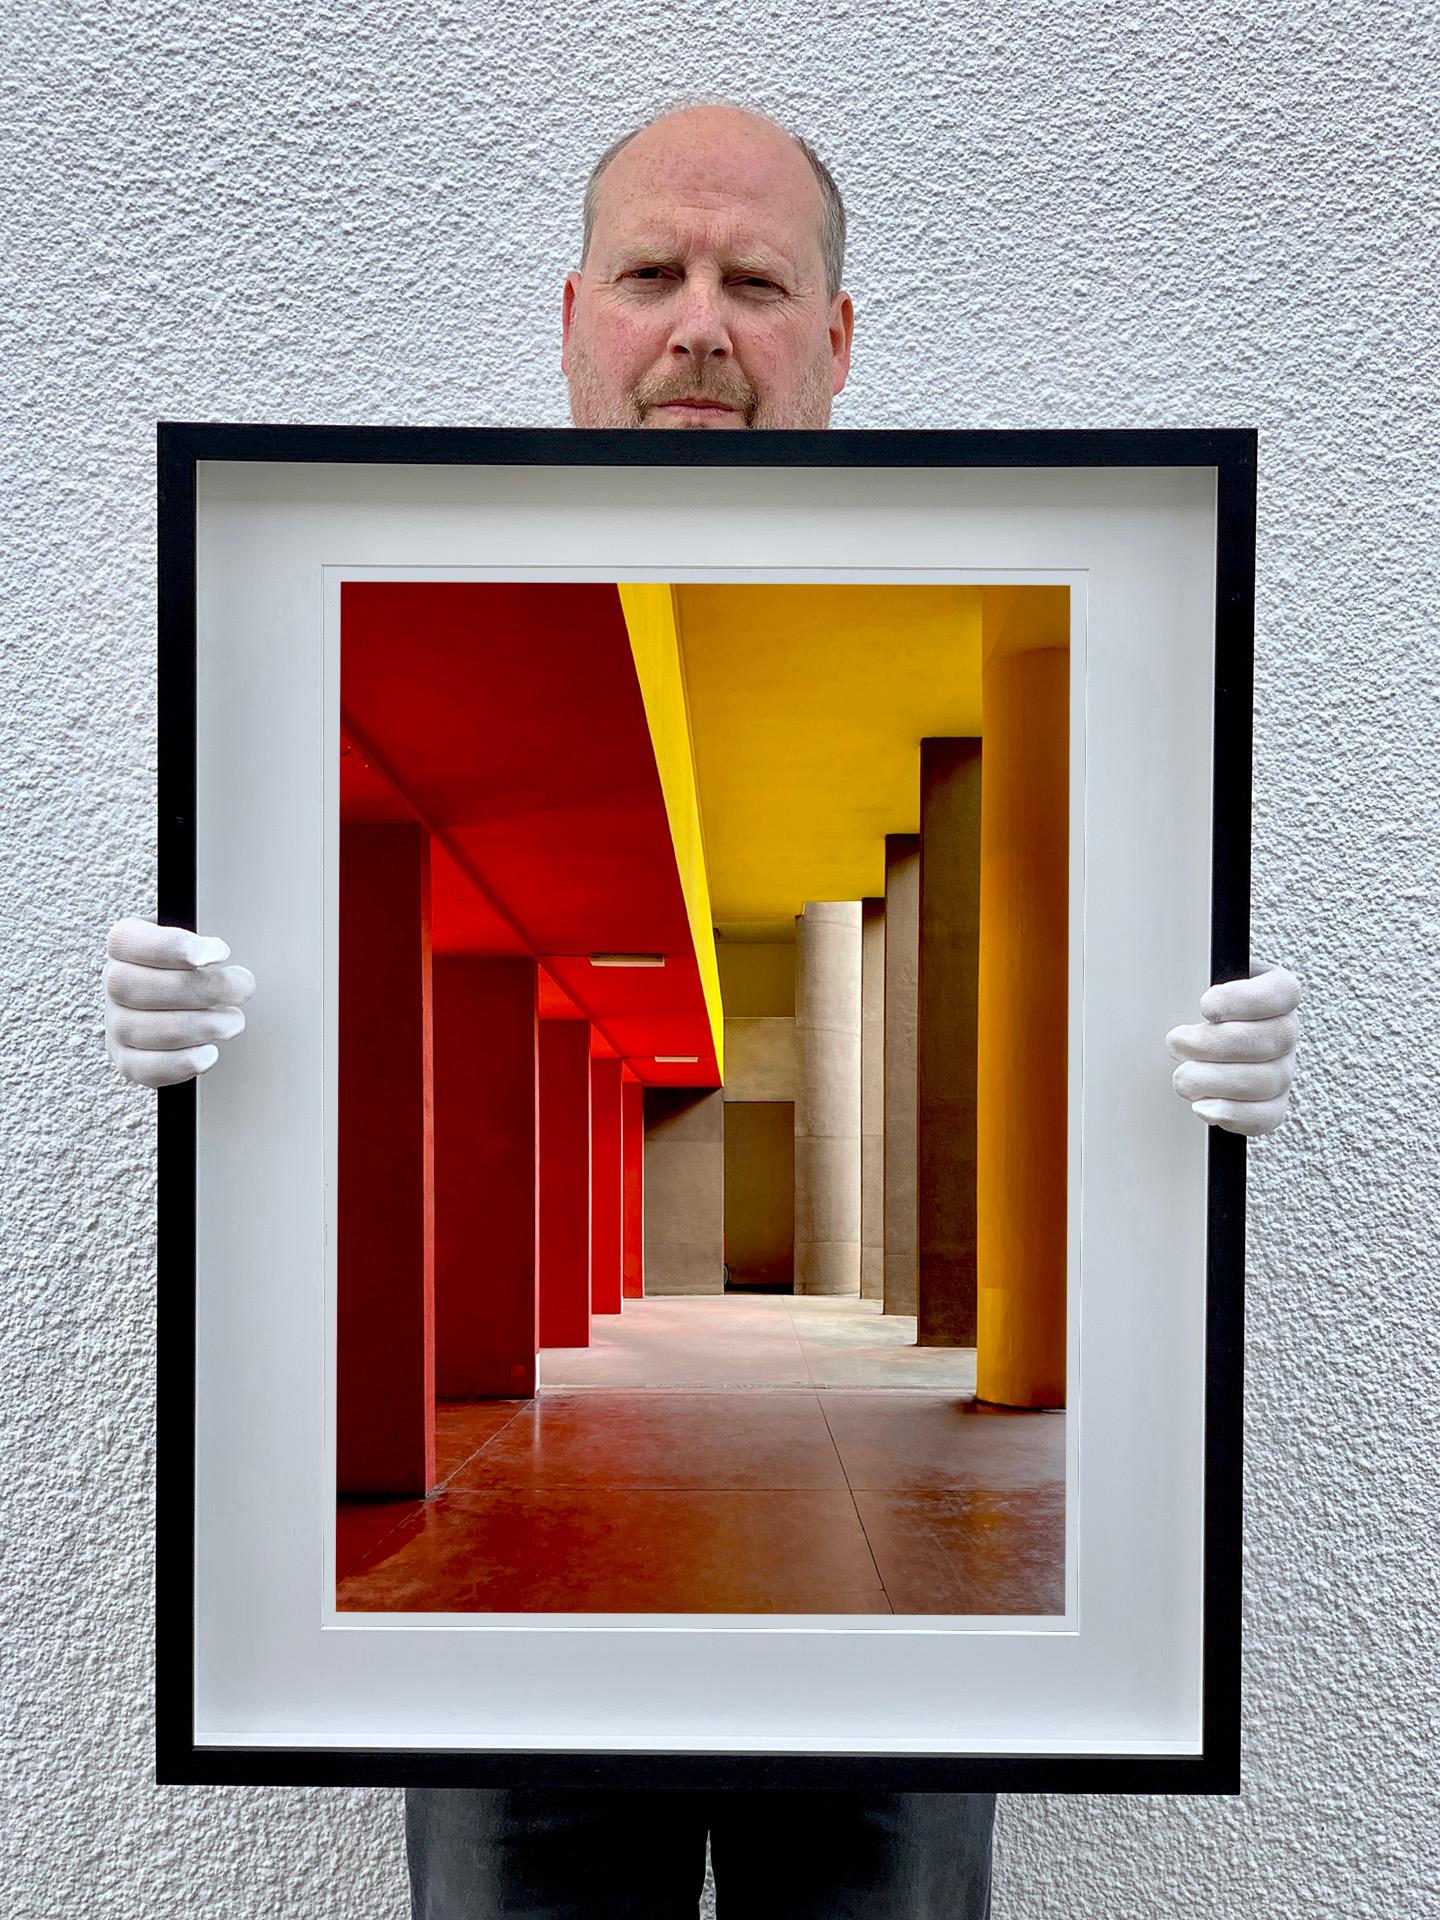 Monte Amiata I and Utopian Foyer IV, Milan - Two Framed Architecture Photographs - Contemporary Print by Richard Heeps